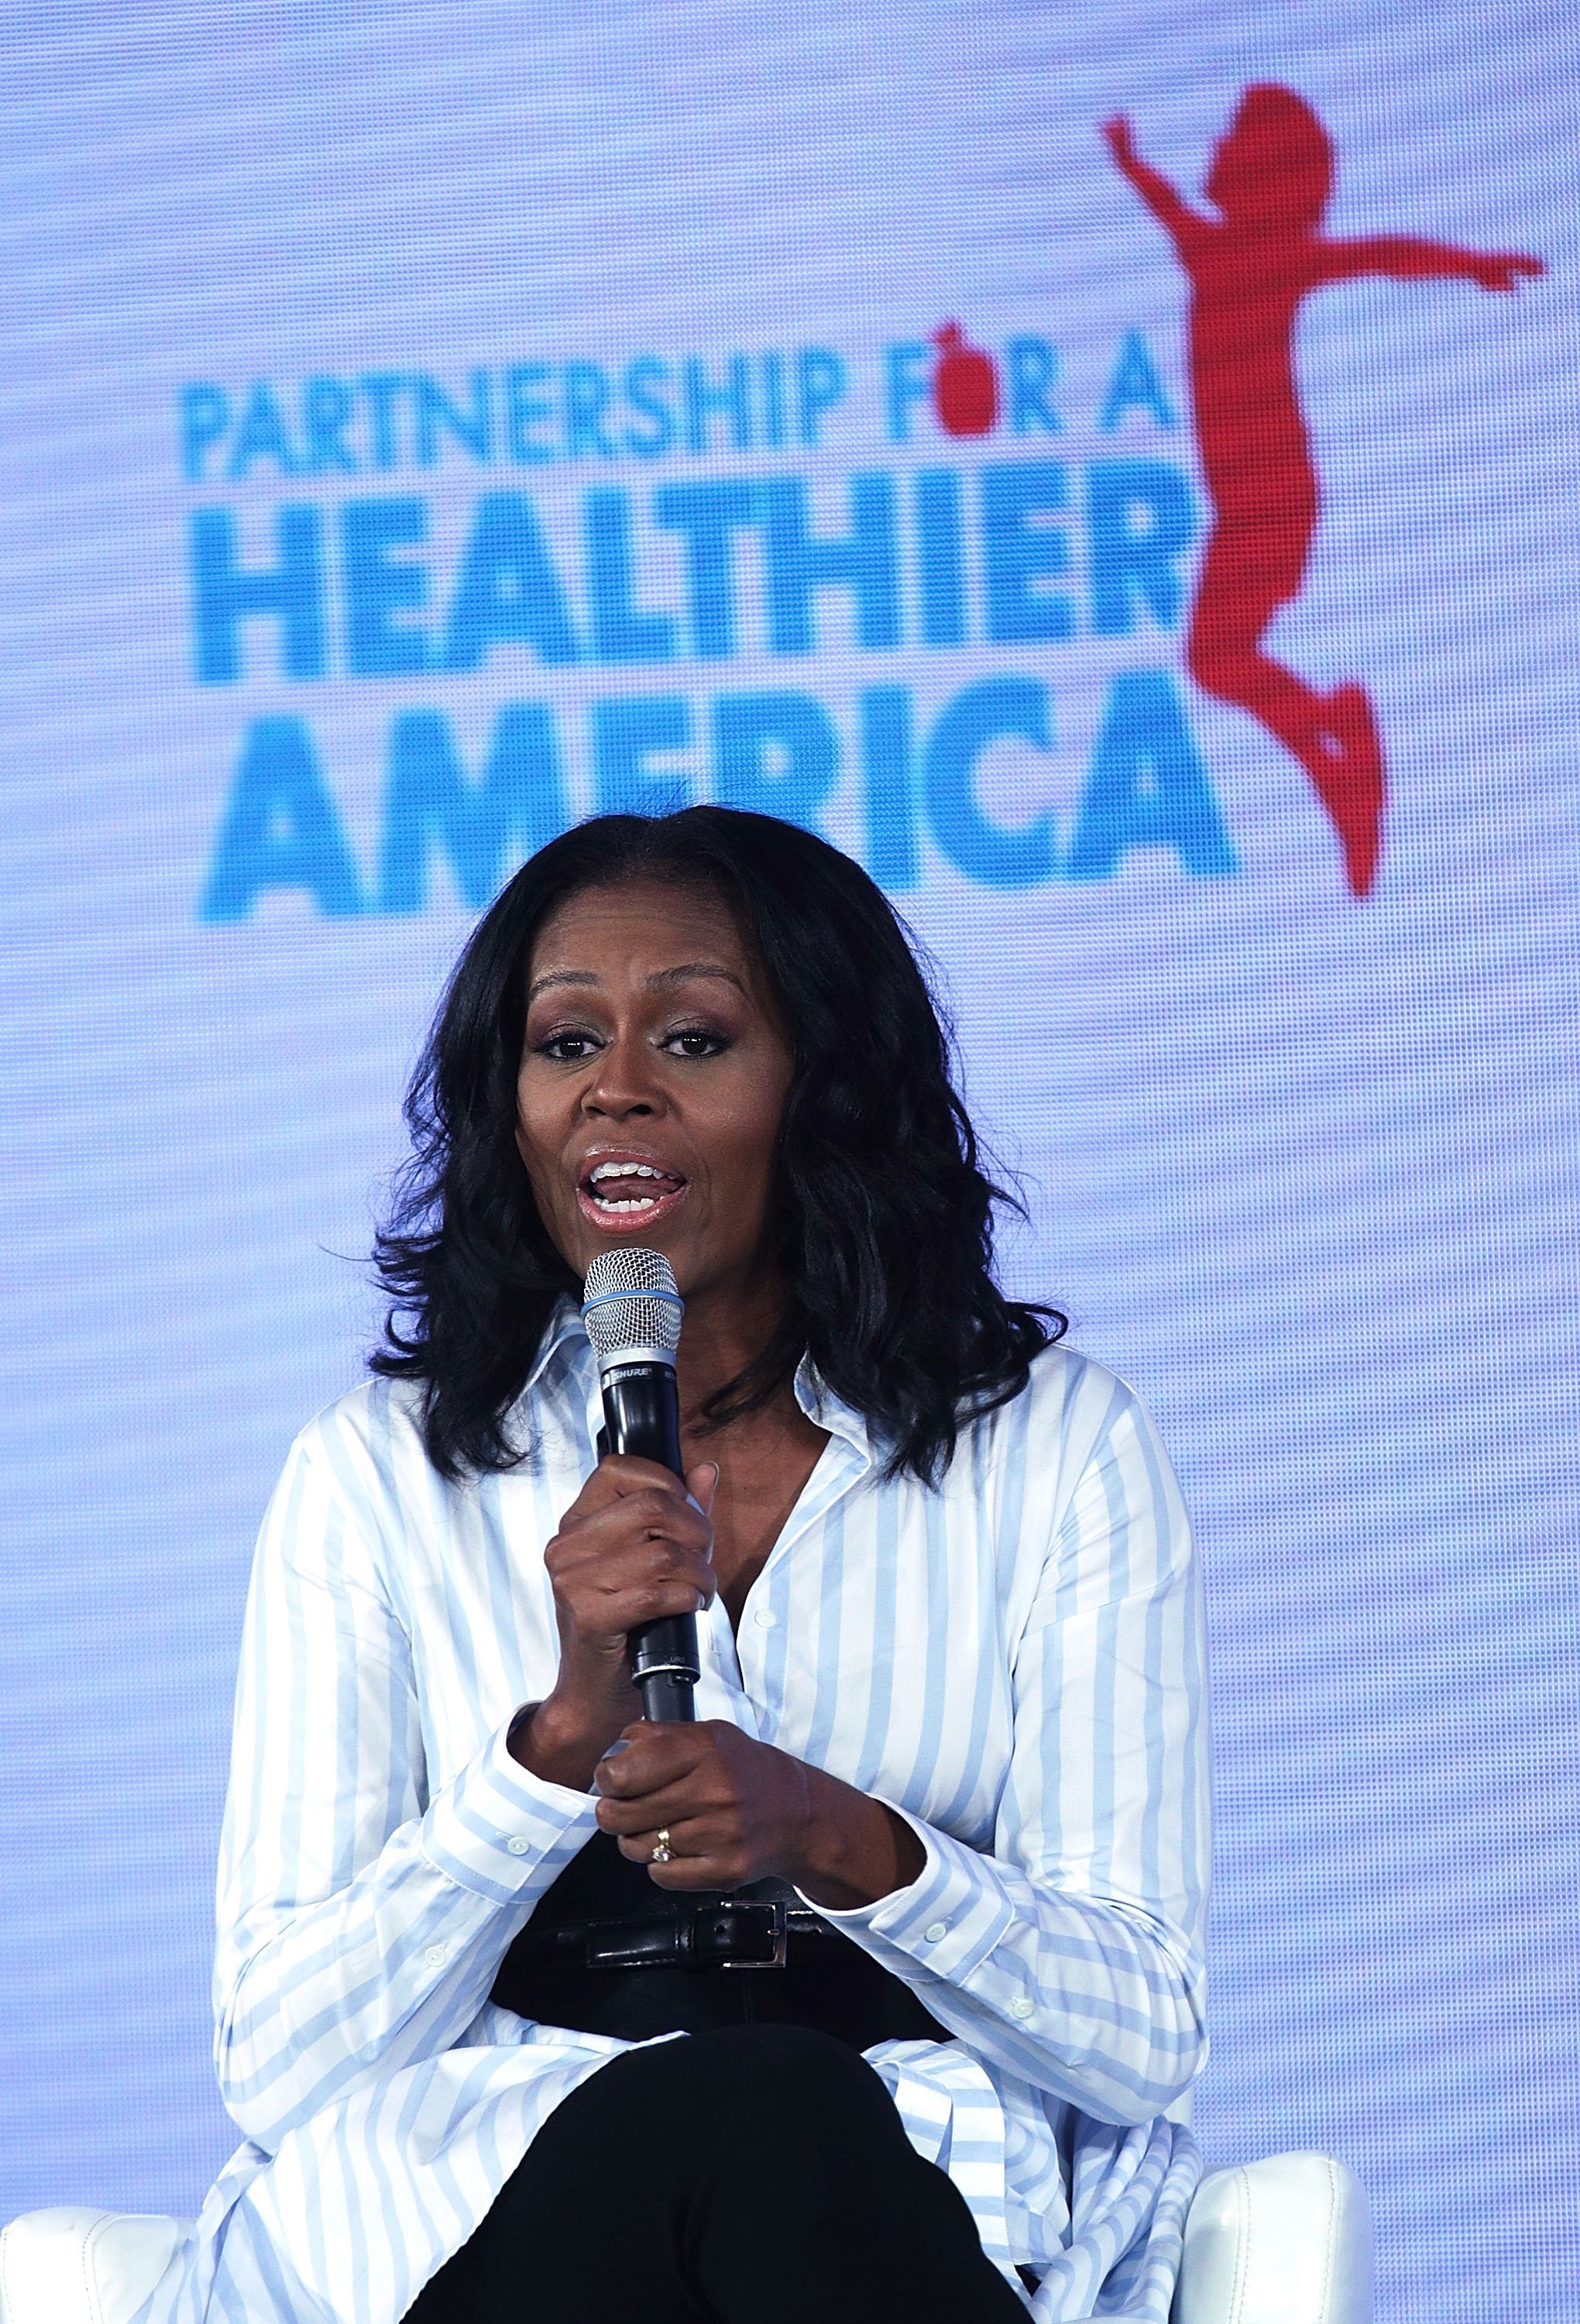 Michelle Obama speaks during the Partnership for a Healthier America Summit May 12, 2017, in Washington, DC. | Source: Getty Images.